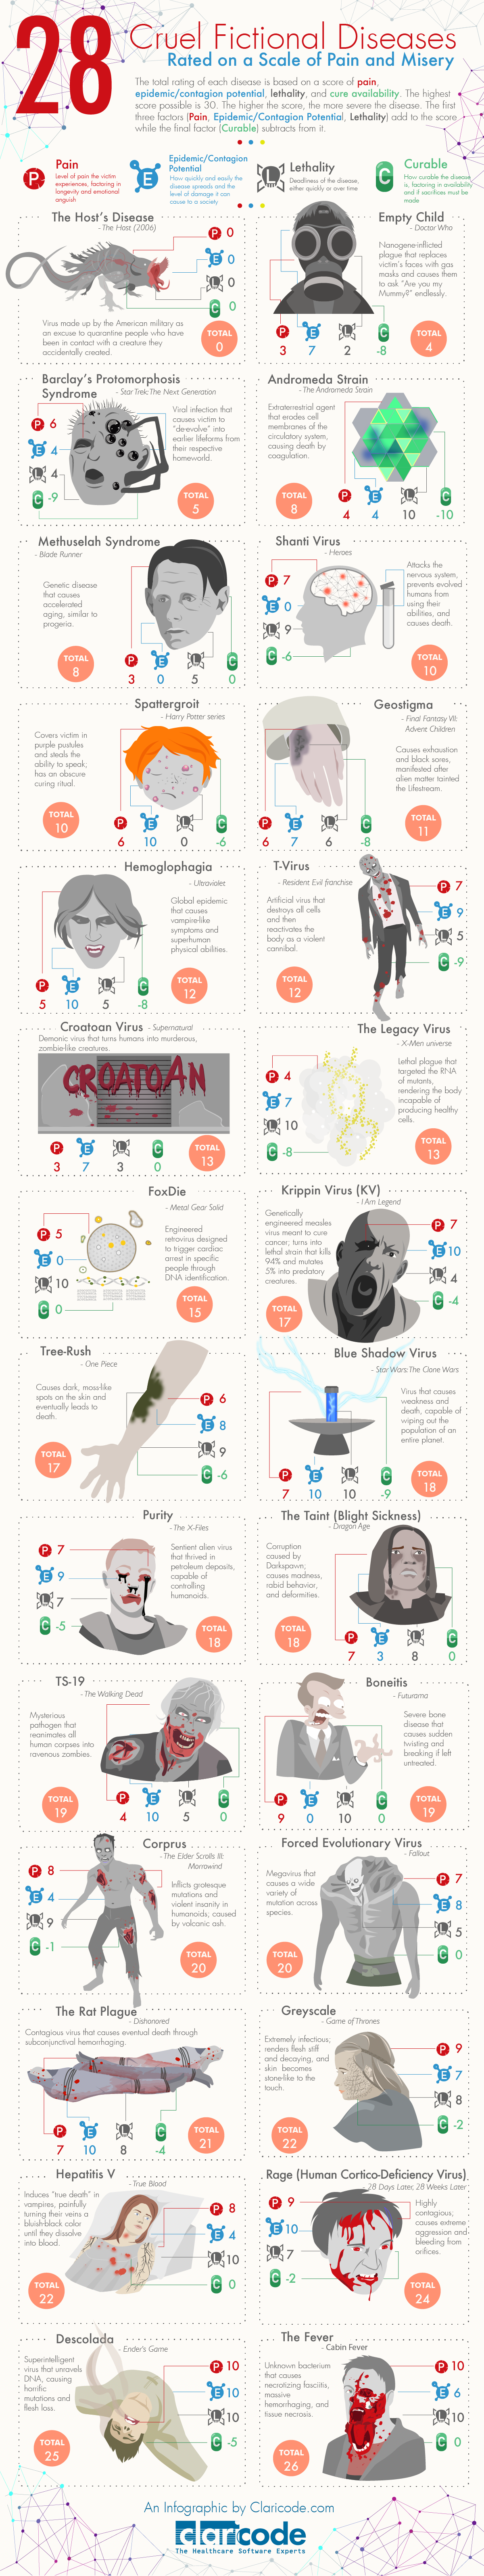 28 Deadly Fictional Diseases From TV, Books, Games, And Films - Infographic